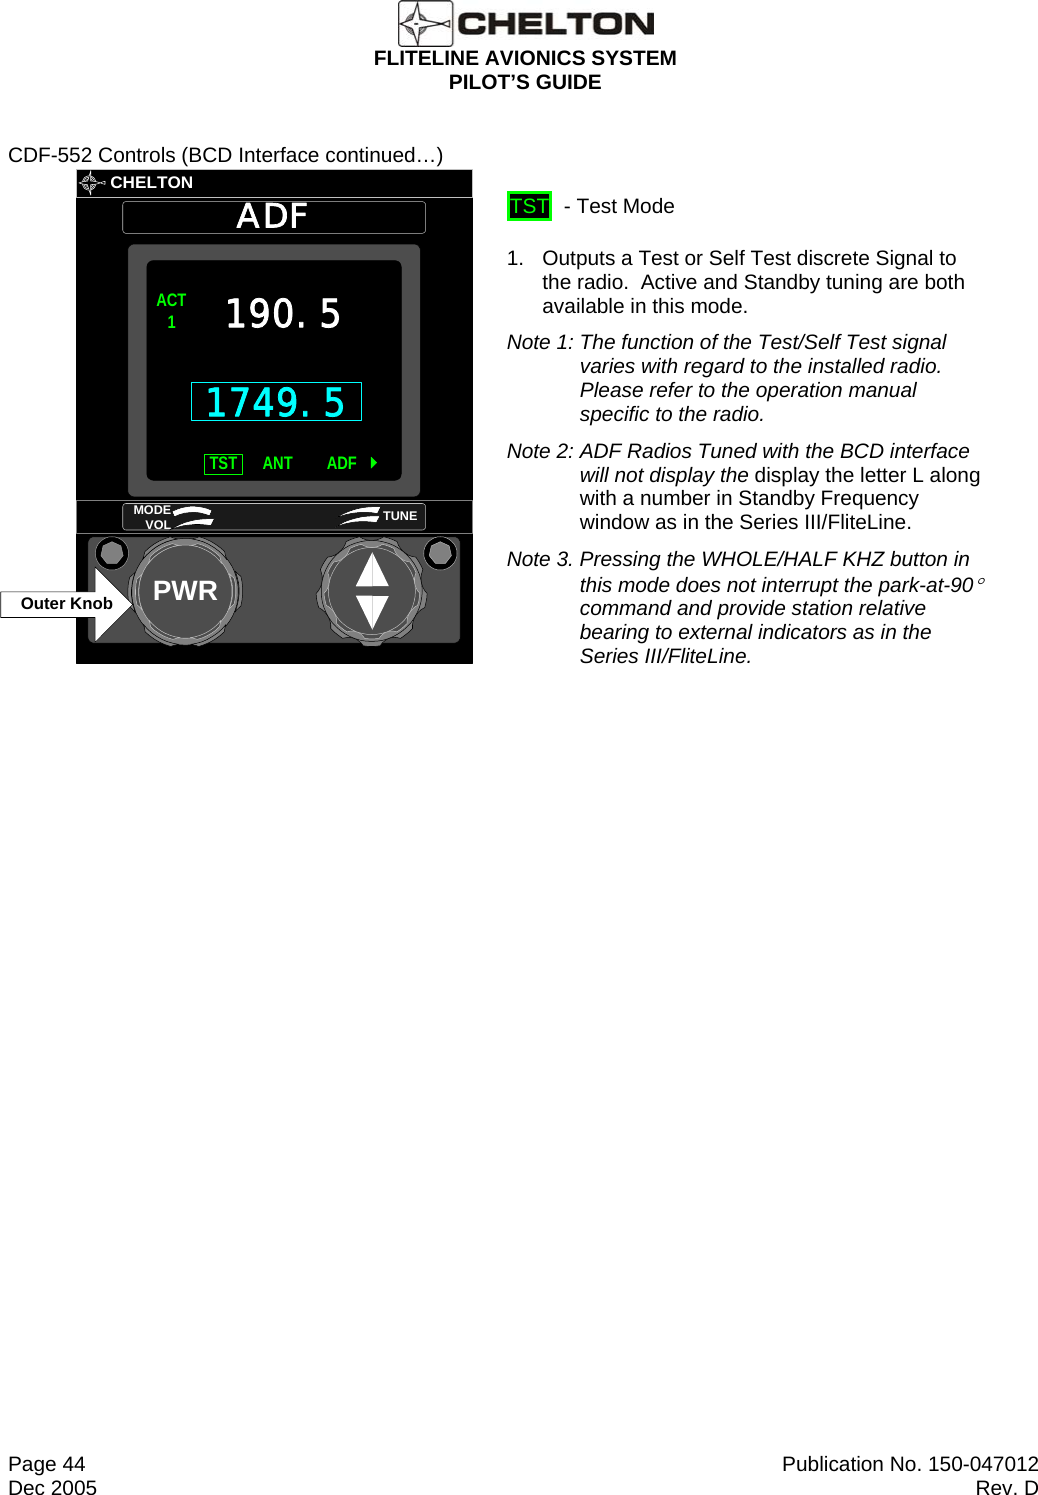  FLITELINE AVIONICS SYSTEM PILOT’S GUIDE  Page 44  Publication No. 150-047012 Dec 2005  Rev. D CDF-552 Controls (BCD Interface continued…)       CHELTONADFPWRACT1TST ADFANT190.5MODE VOL TUNEOuter Knob1749.5  TST  - Test Mode 1.   Outputs a Test or Self Test discrete Signal to the radio.  Active and Standby tuning are both available in this mode. Note 1: The function of the Test/Self Test signal varies with regard to the installed radio.  Please refer to the operation manual specific to the radio. Note 2: ADF Radios Tuned with the BCD interface will not display the display the letter L along with a number in Standby Frequency window as in the Series III/FliteLine. Note 3. Pressing the WHOLE/HALF KHZ button in this mode does not interrupt the park-at-90° command and provide station relative bearing to external indicators as in the Series III/FliteLine.   